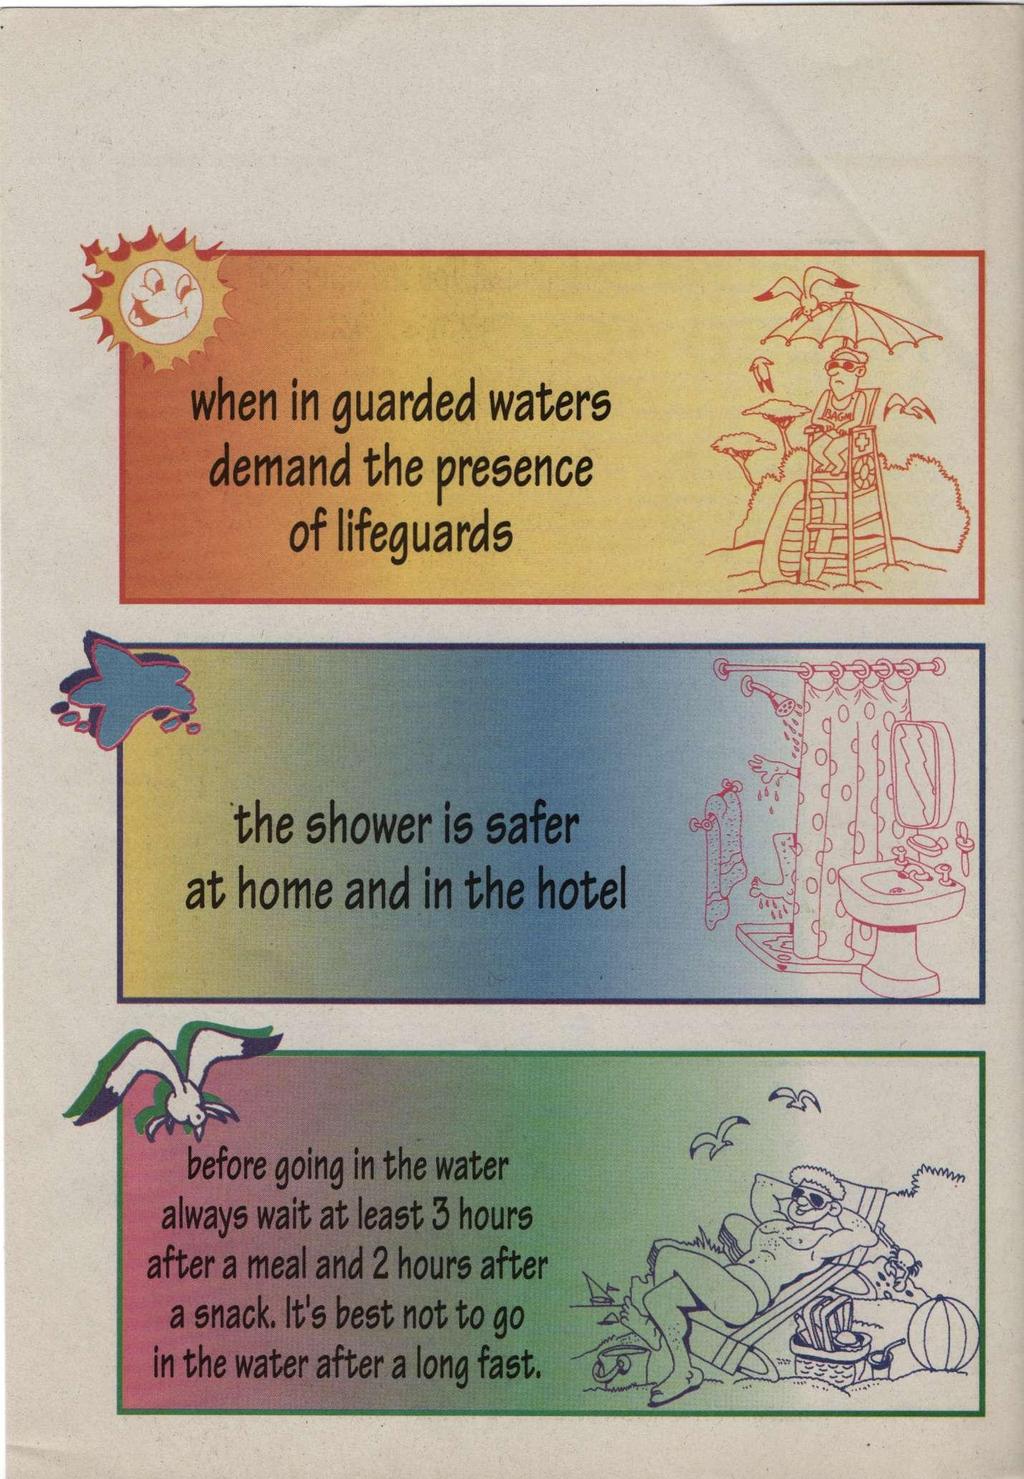 when in guarded waters demand the presence of lifeguards the shower is safer at home and in the hotel 4 before going in the